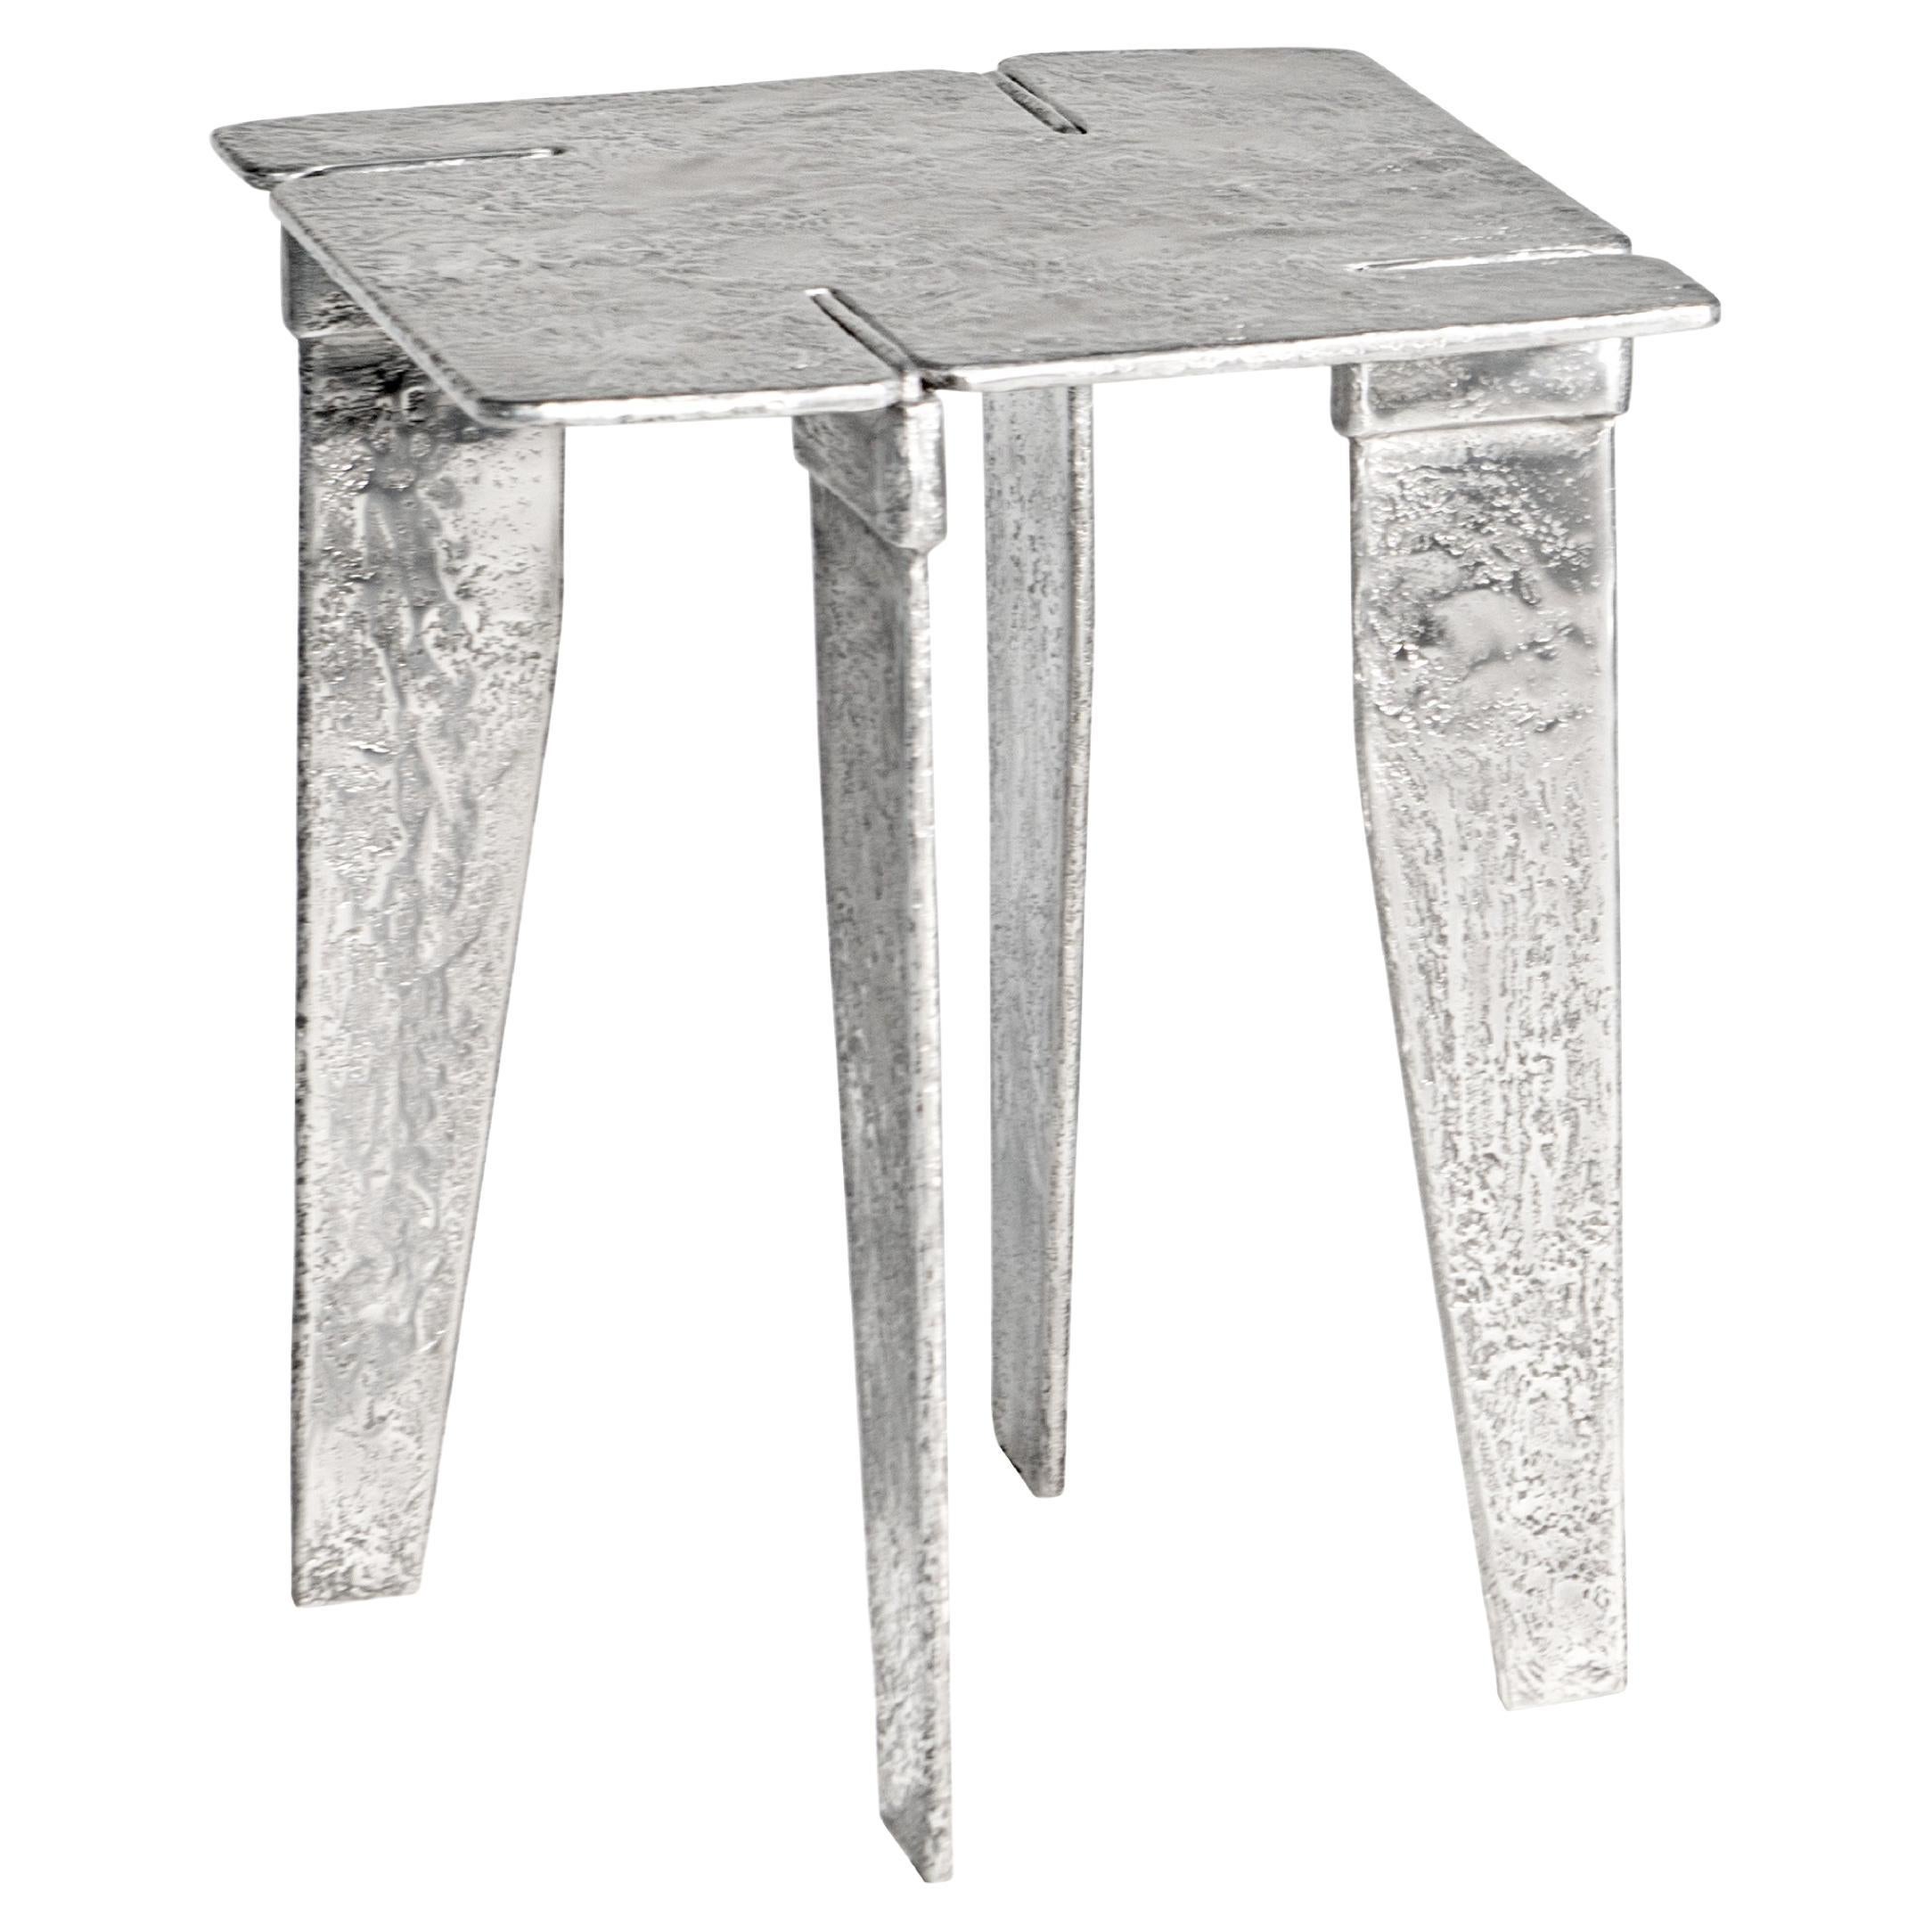 Contemporary sculptural Side Table by Hessentia in aluminium casting, real metal